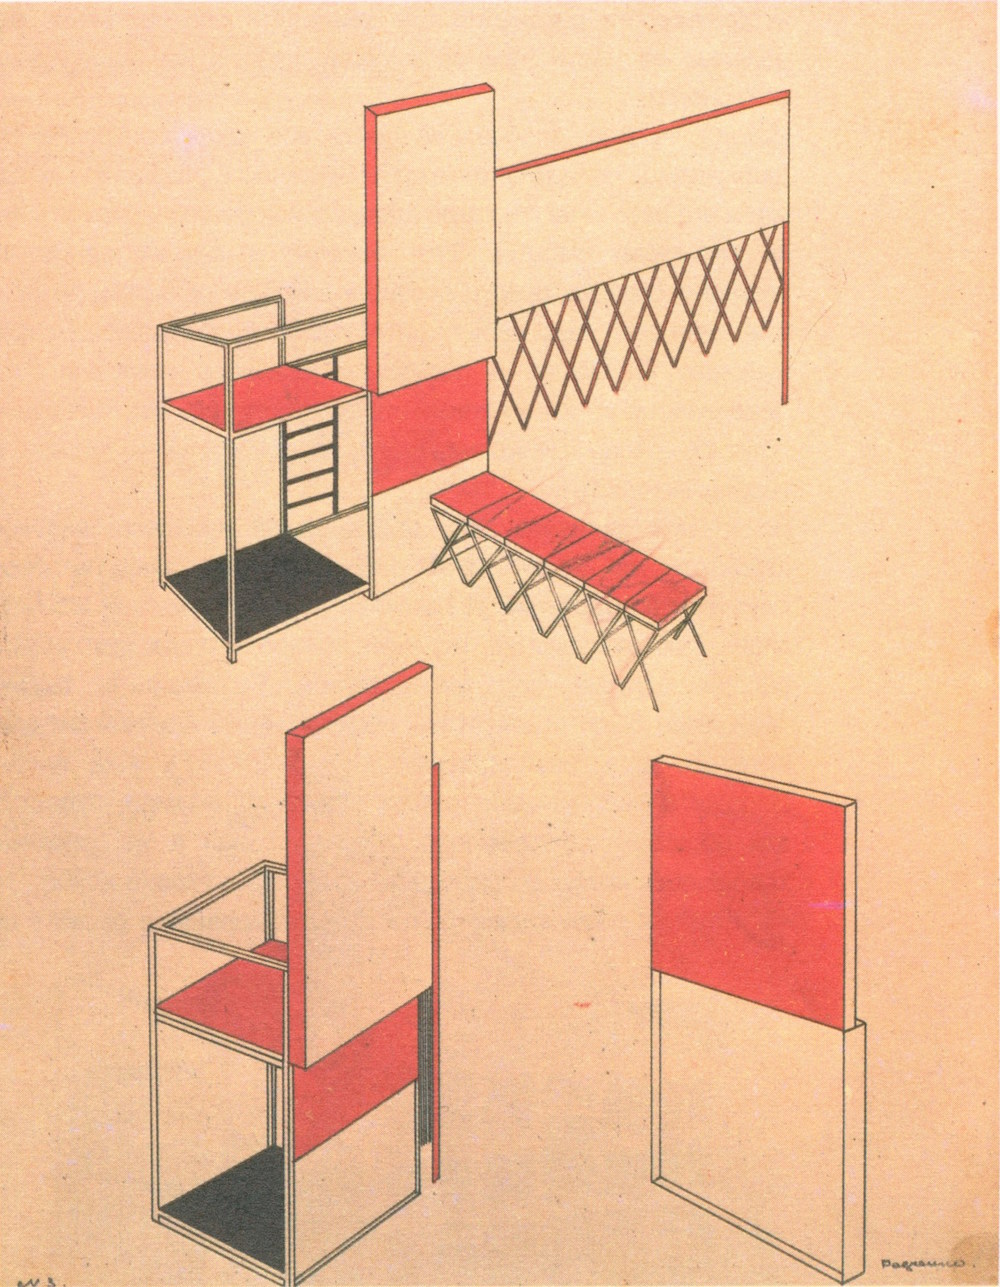 From Rodchenko’s original sketches for the club. Image: The Charnel House